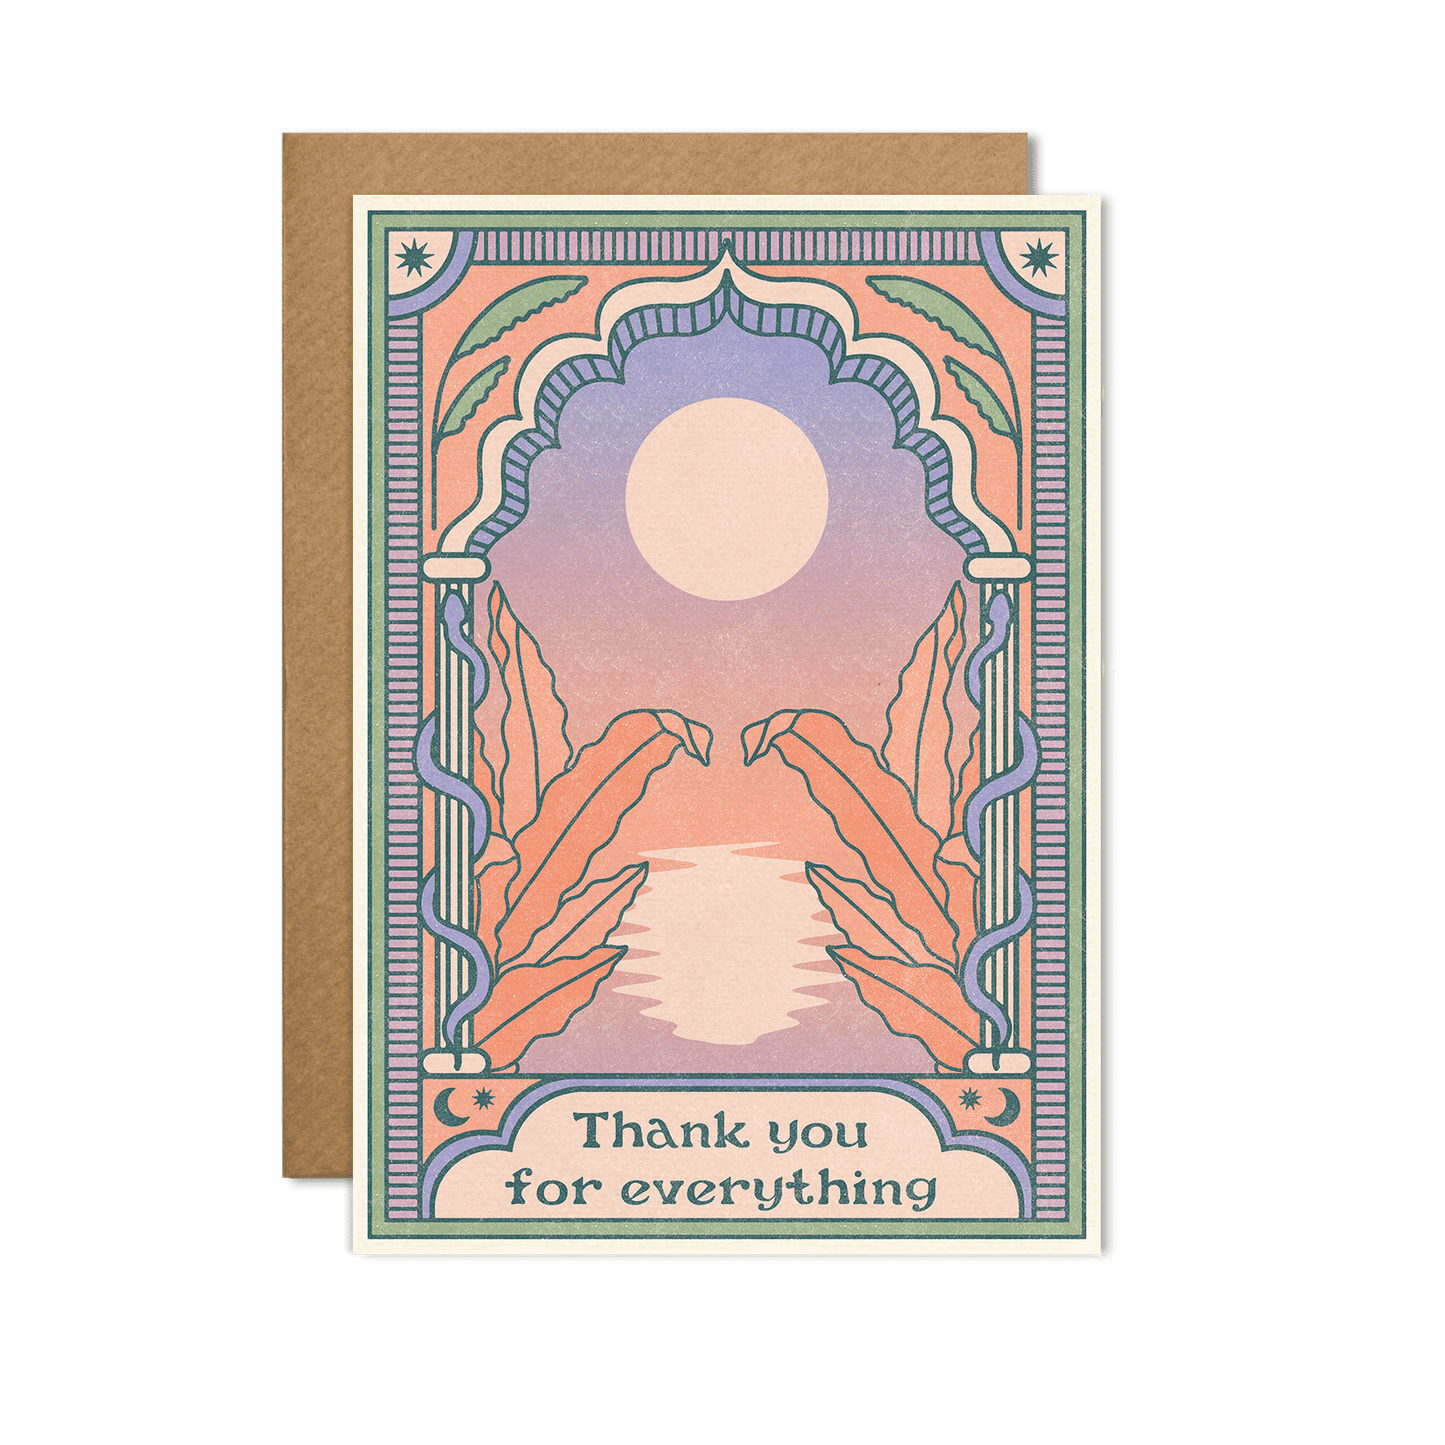 Thank you for everything Card